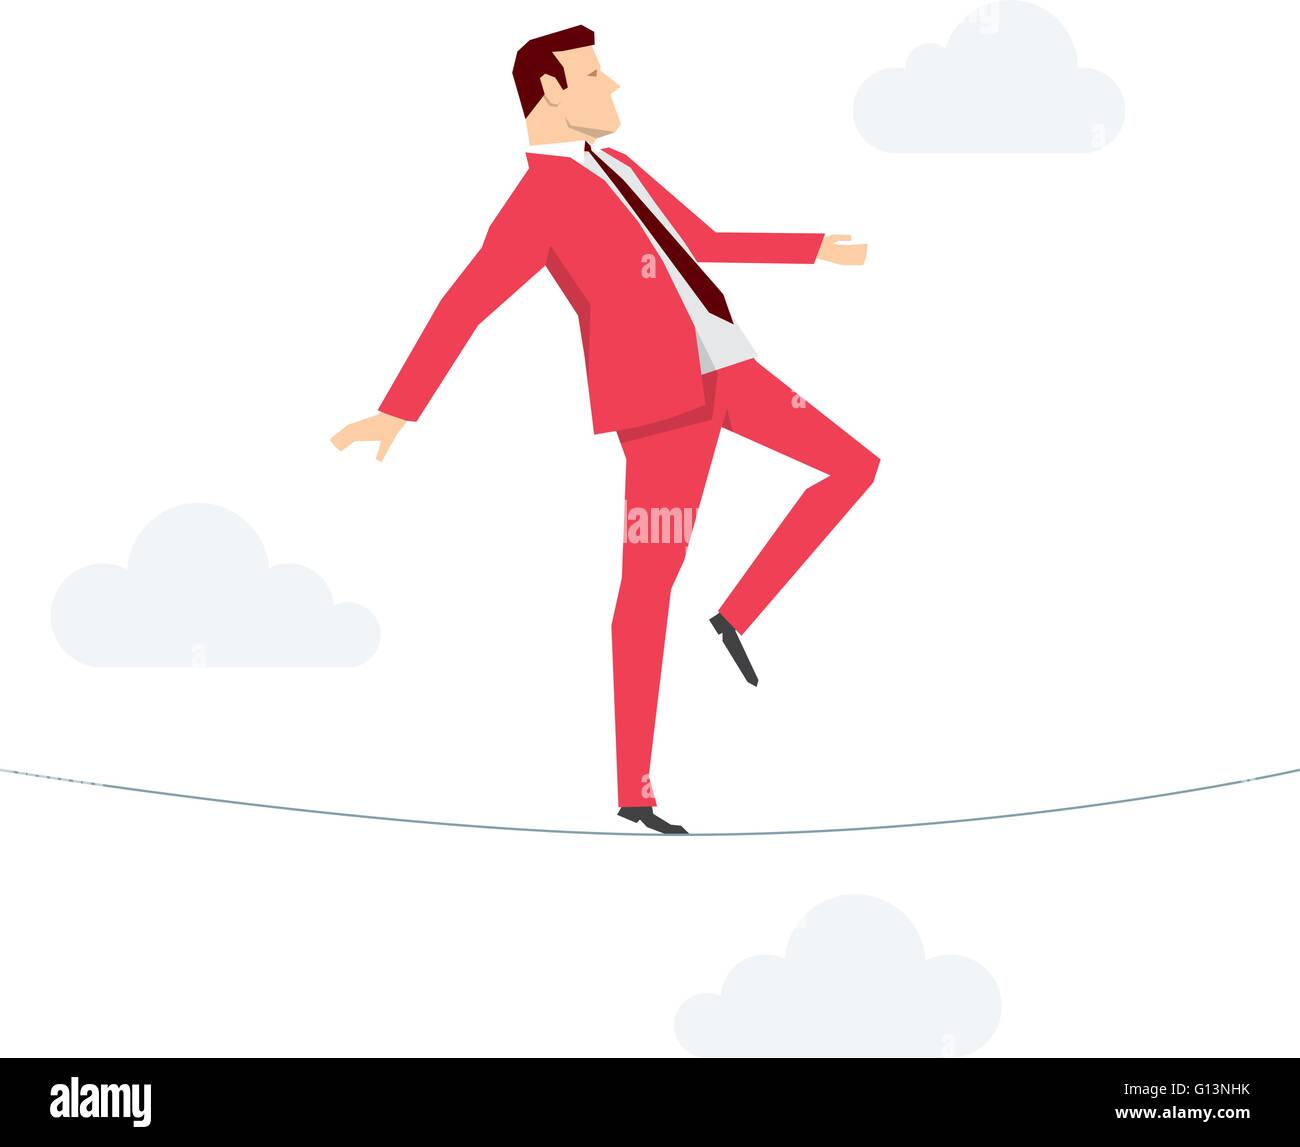 Red suit businessman walking on rope. Vector concept illustration. Stock Vector